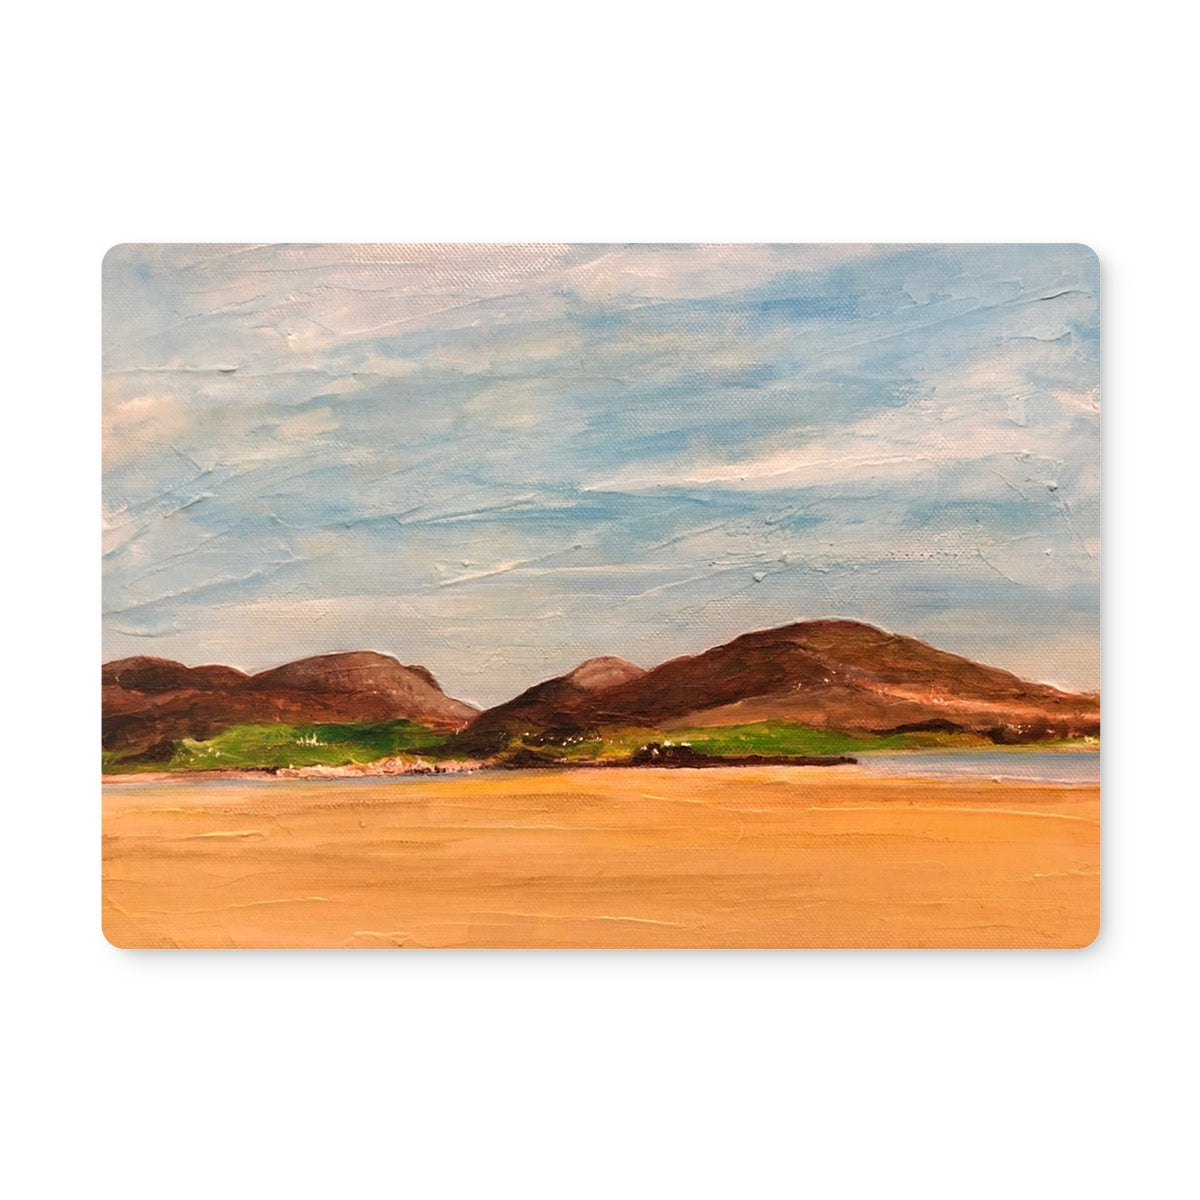 Uig Sands Lewis Art Gifts Placemat-Placemats-Hebridean Islands Art Gallery-4 Placemats-Paintings, Prints, Homeware, Art Gifts From Scotland By Scottish Artist Kevin Hunter